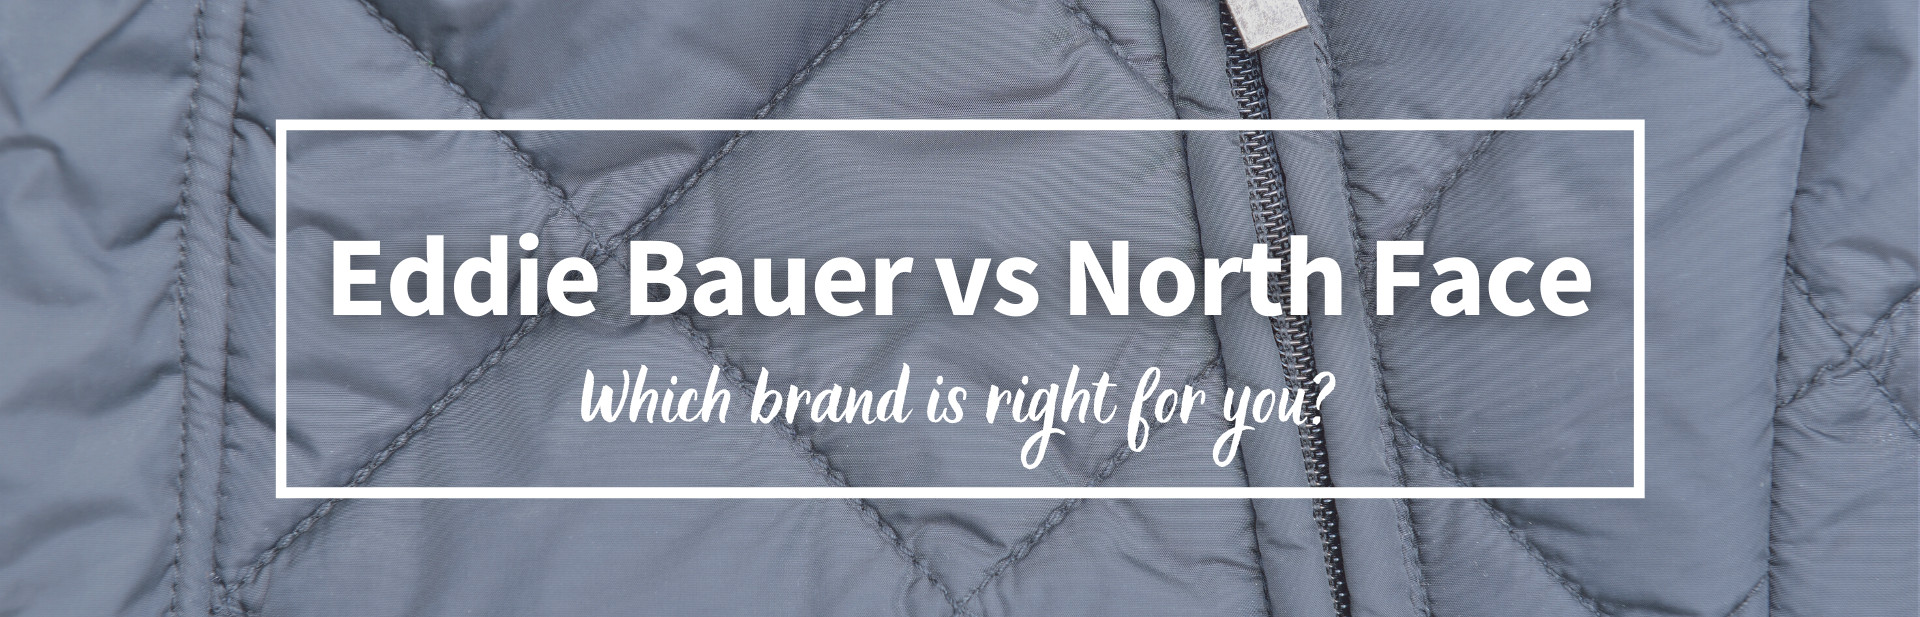 Eddie Bauer vs North Face: Which Brand Is Right For You?